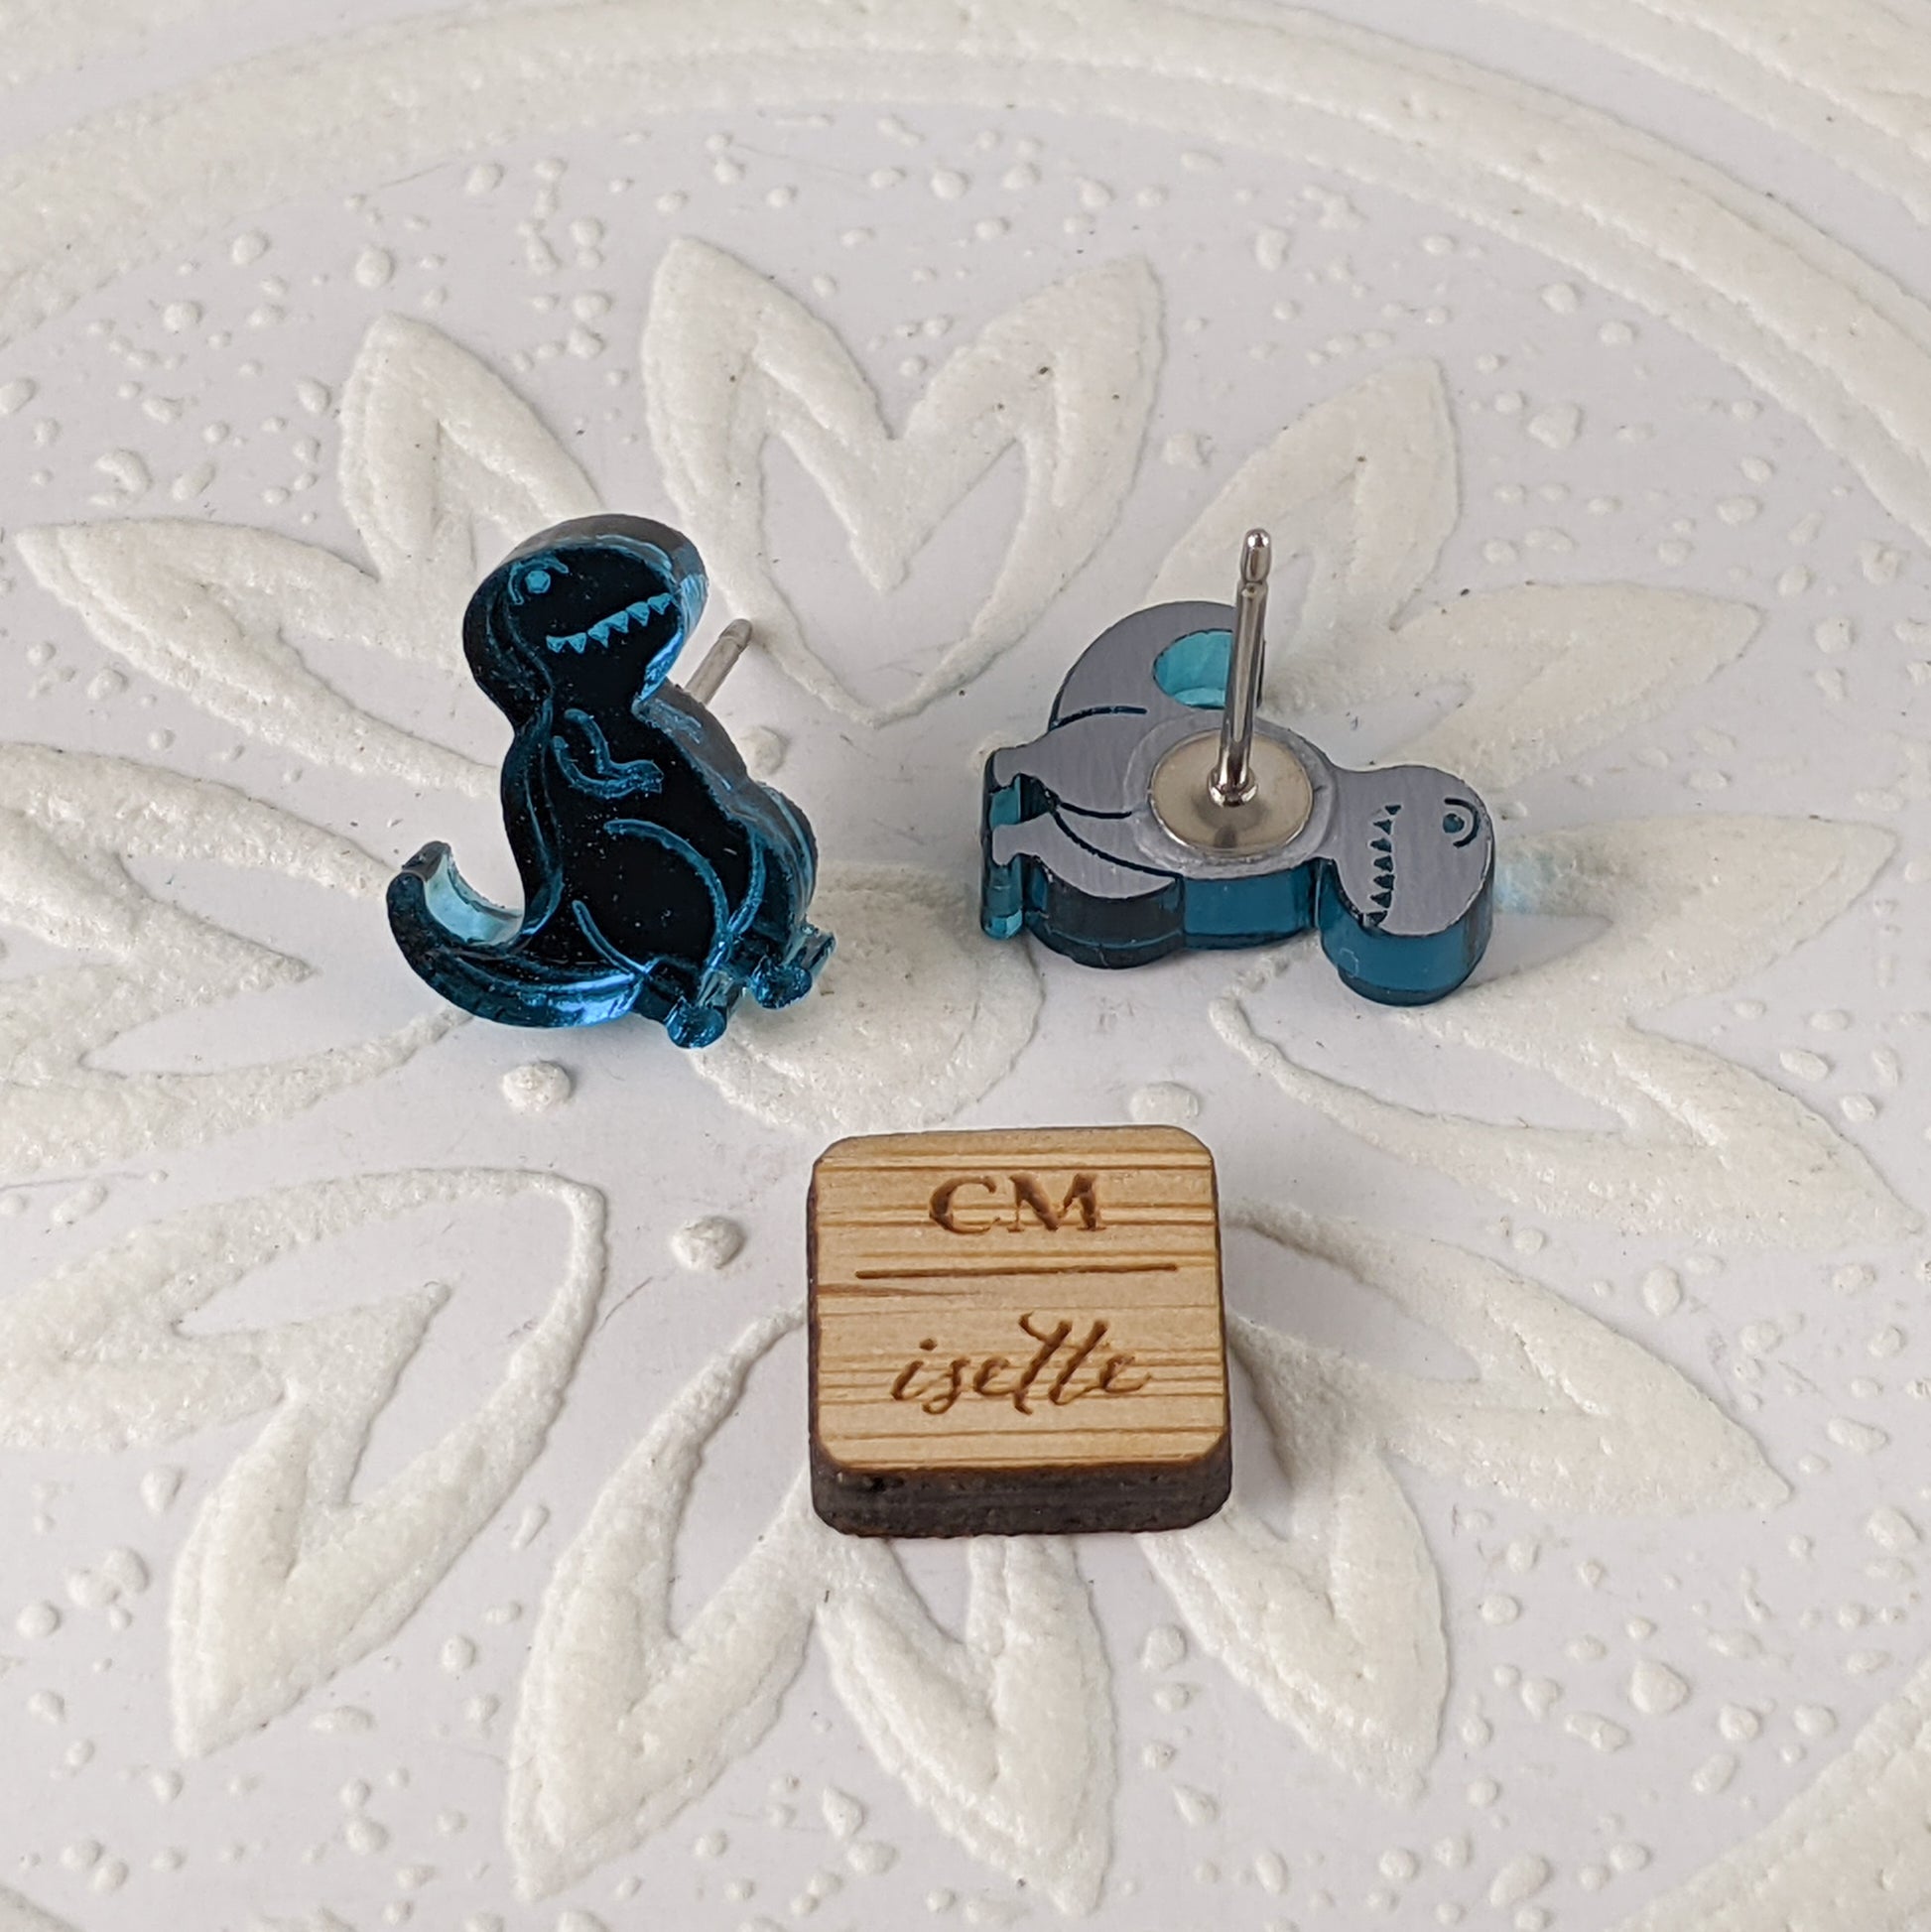 Cartoon Tyrannosaurus Rex stud earrings in teal mirrored acrylic.  They are photographed with one standing, one face down, next to a 1 cm wooden square for size comparison. By Isette.